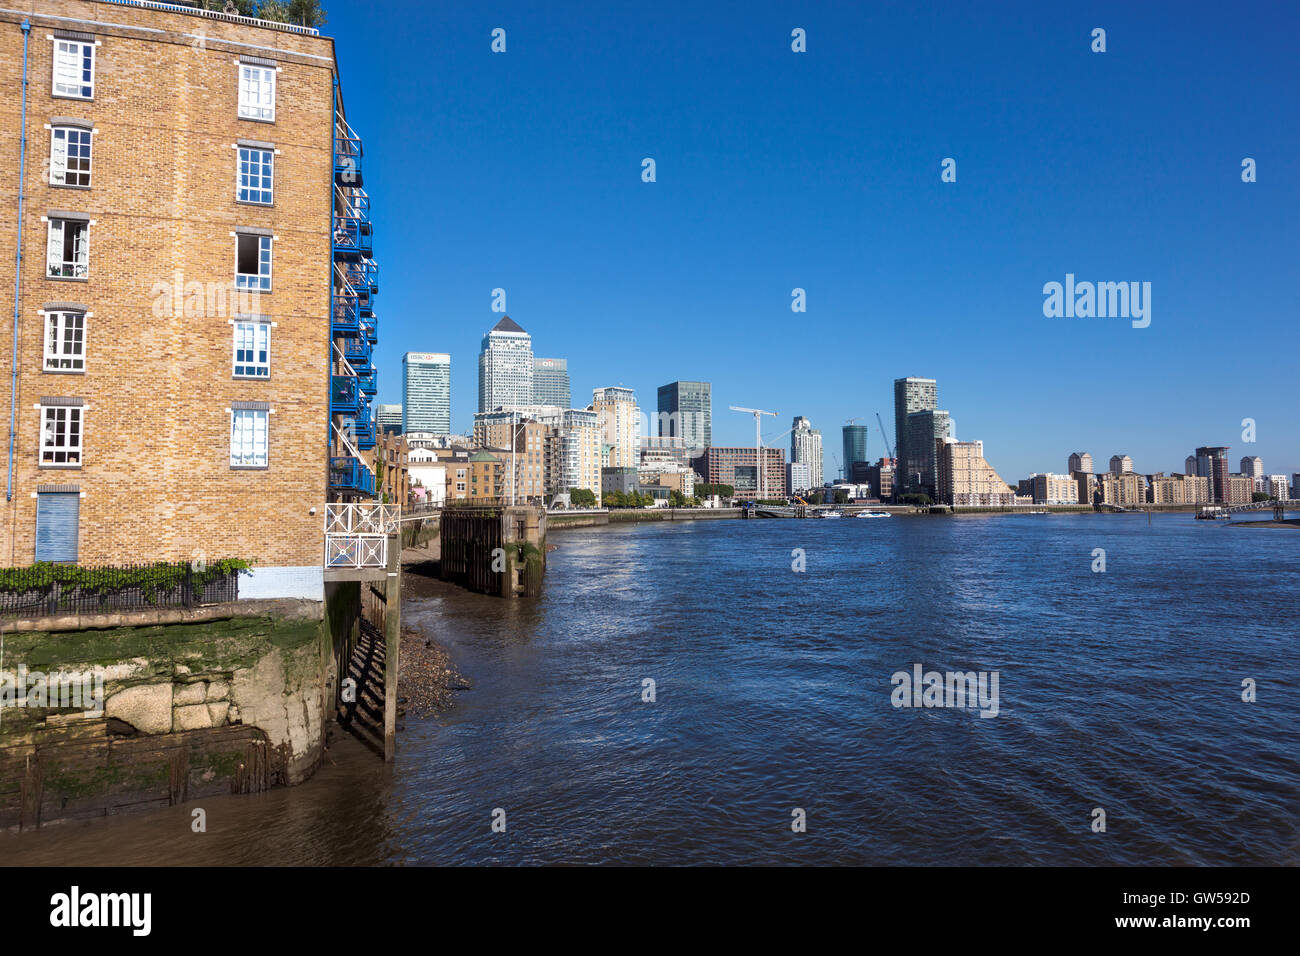 The skyscrapers of Canary Wharf viewed from the Thames bank in Limehouse, London, UK Stock Photo